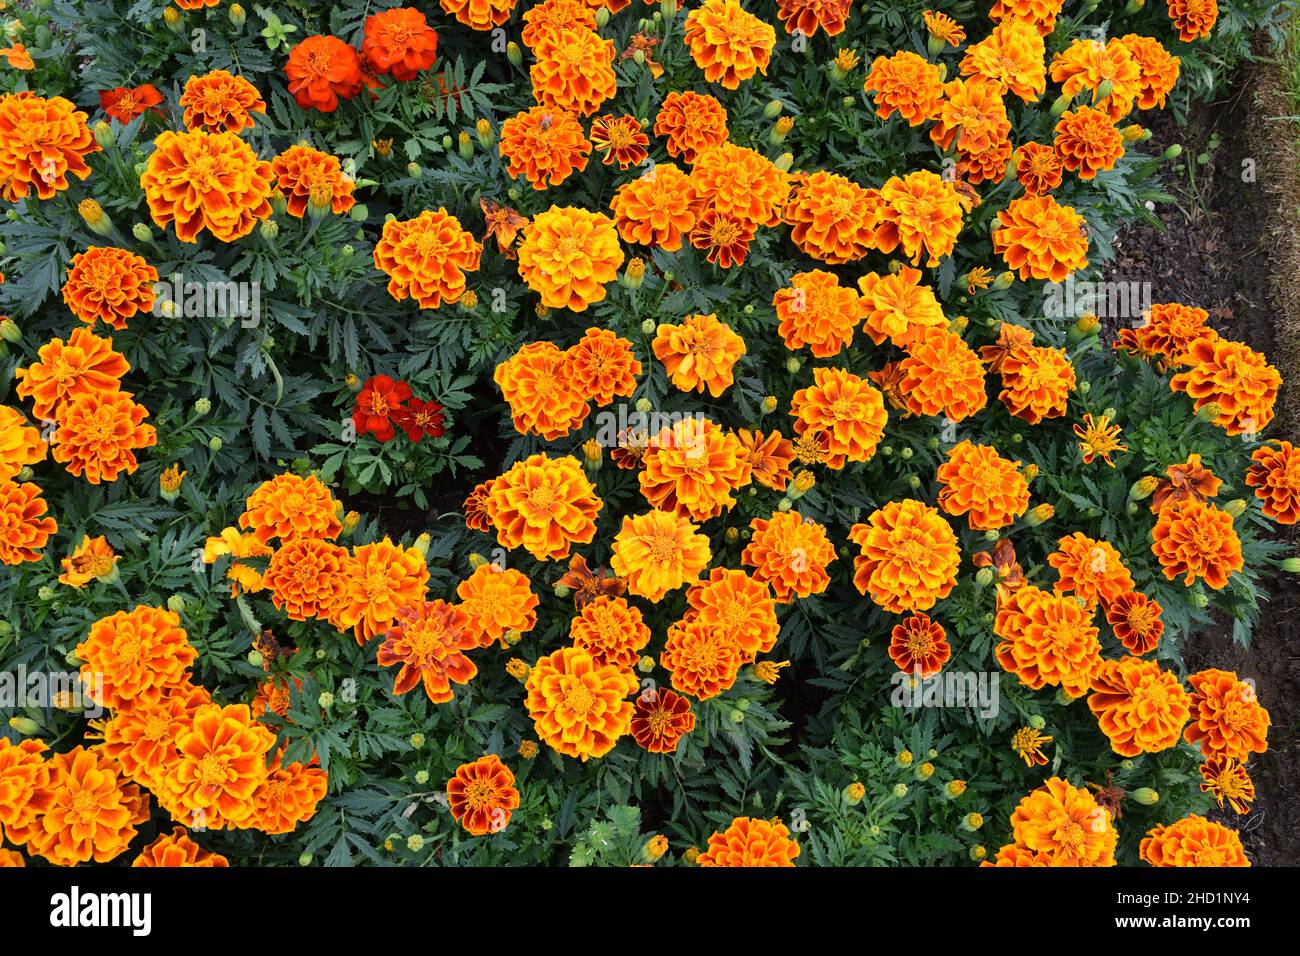 Marigold name Colossus. Mass of  Red and Yellow flowers. The largest French marigold  flowers. Stock Photo